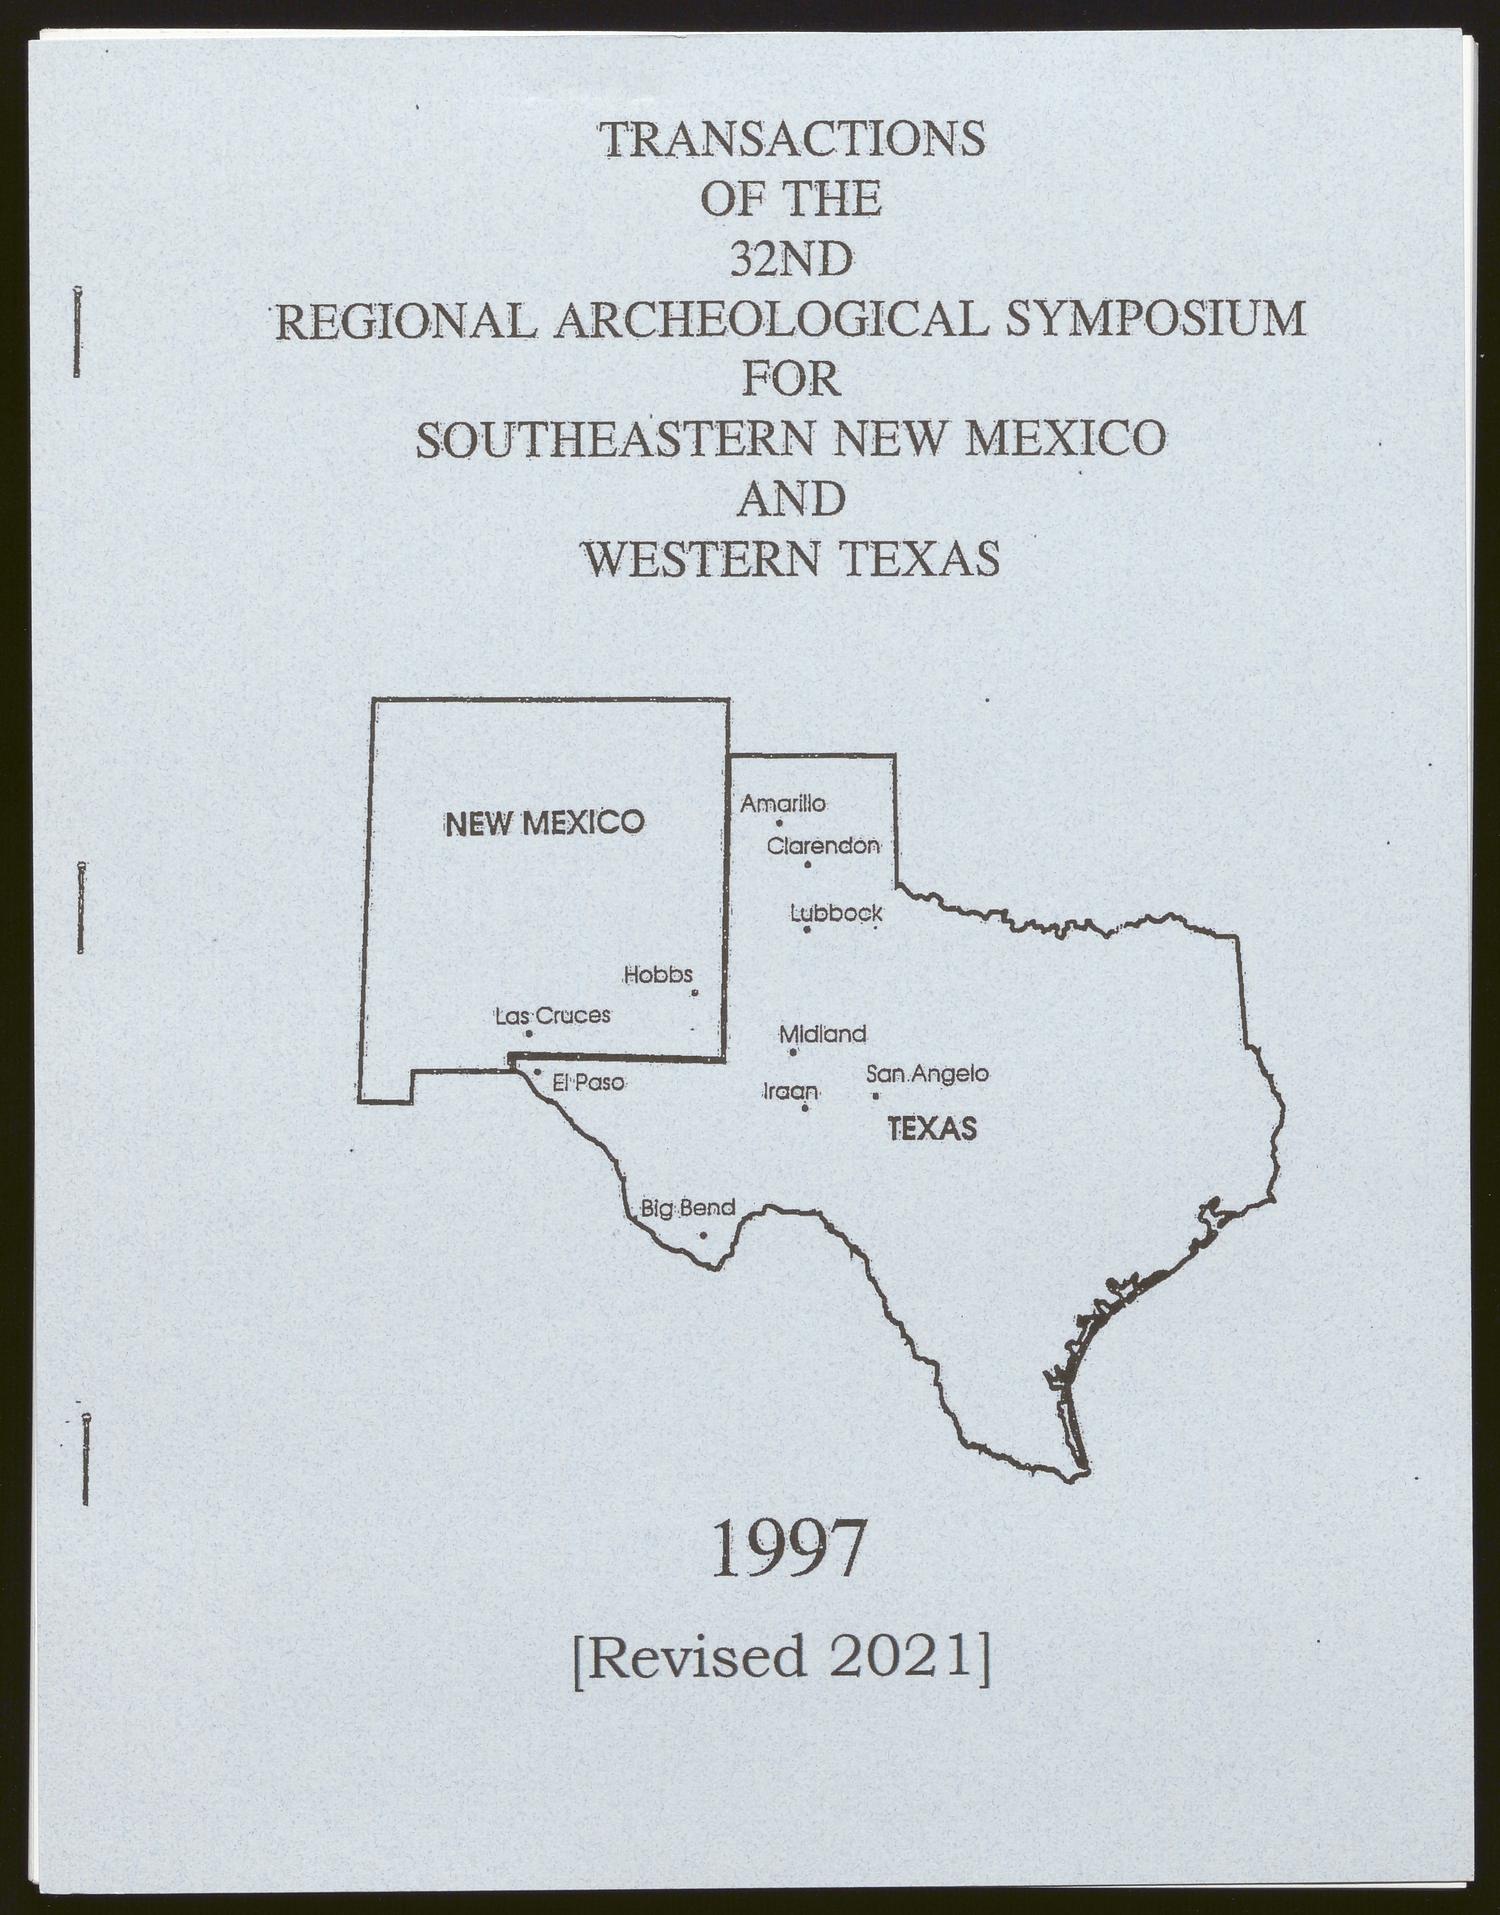 Transactions of the Regional Archeological Symposium for Southeastern New Mexico and Western Texas: 1996
                                                
                                                    Front Cover
                                                